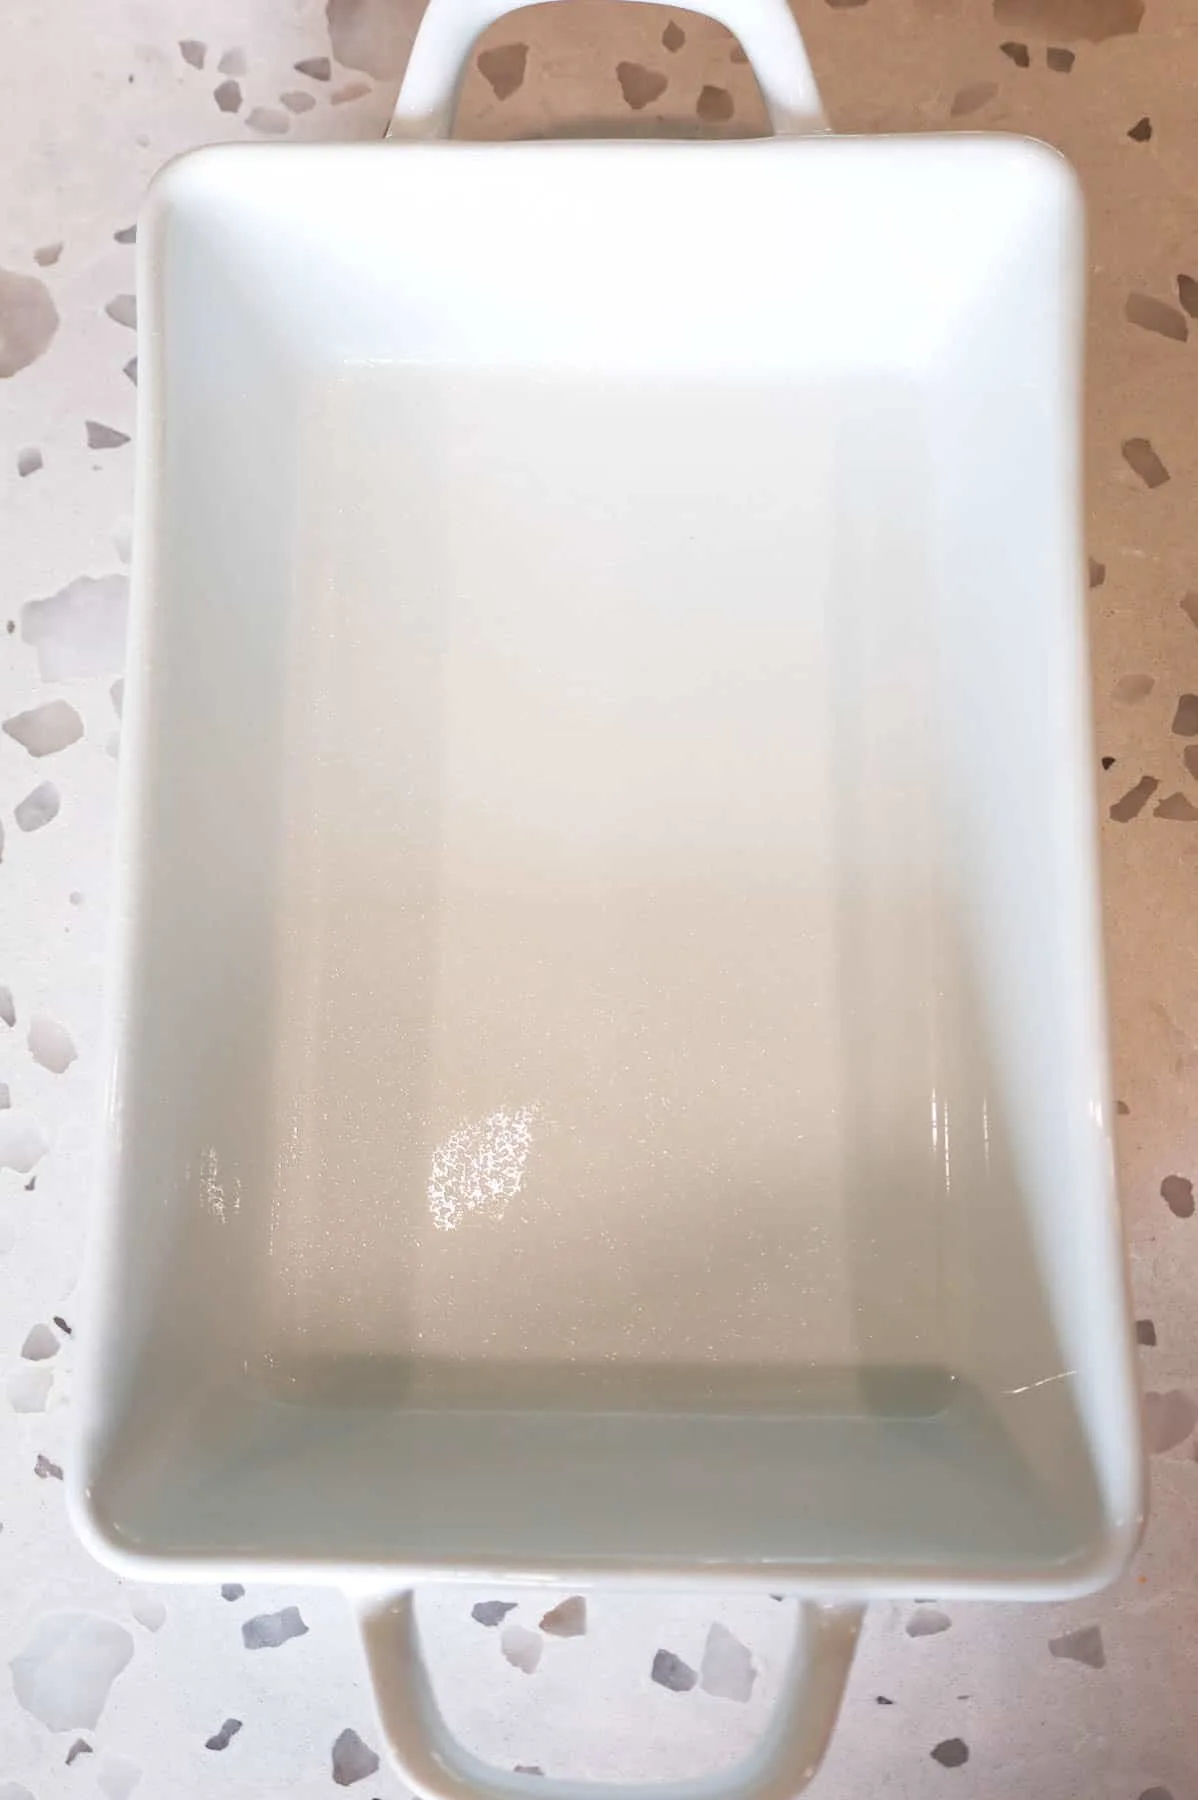 9 x 13 inch baking dish greased with cooking spray